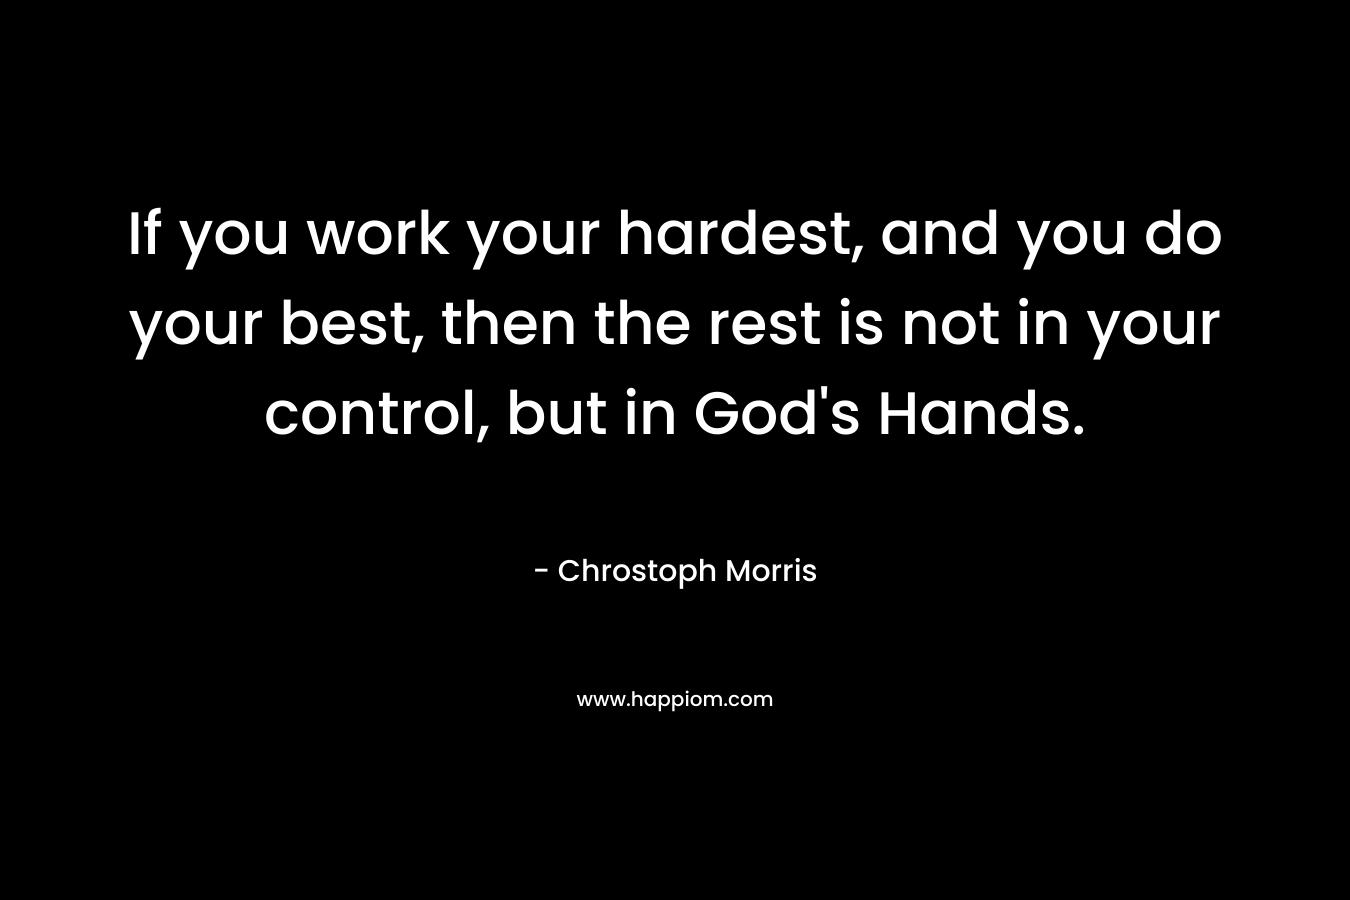 If you work your hardest, and you do your best, then the rest is not in your control, but in God's Hands.